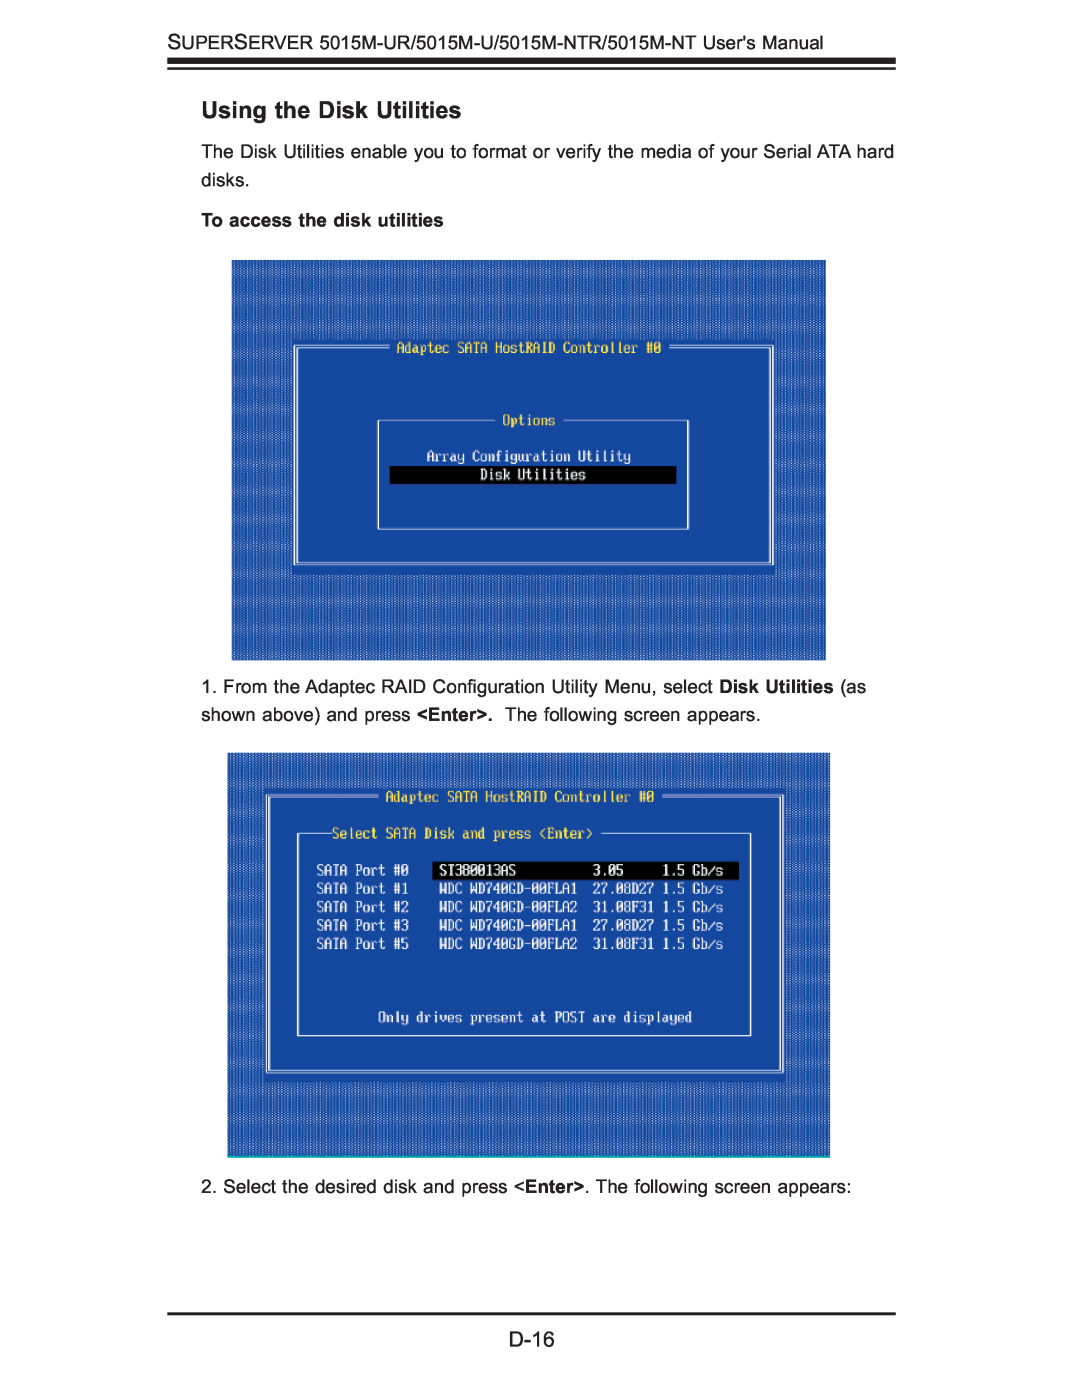 SUPER MICRO Computer 5015M-UR, 5015M-NTR user manual Using the Disk Utilities, D-16, To access the disk utilities 